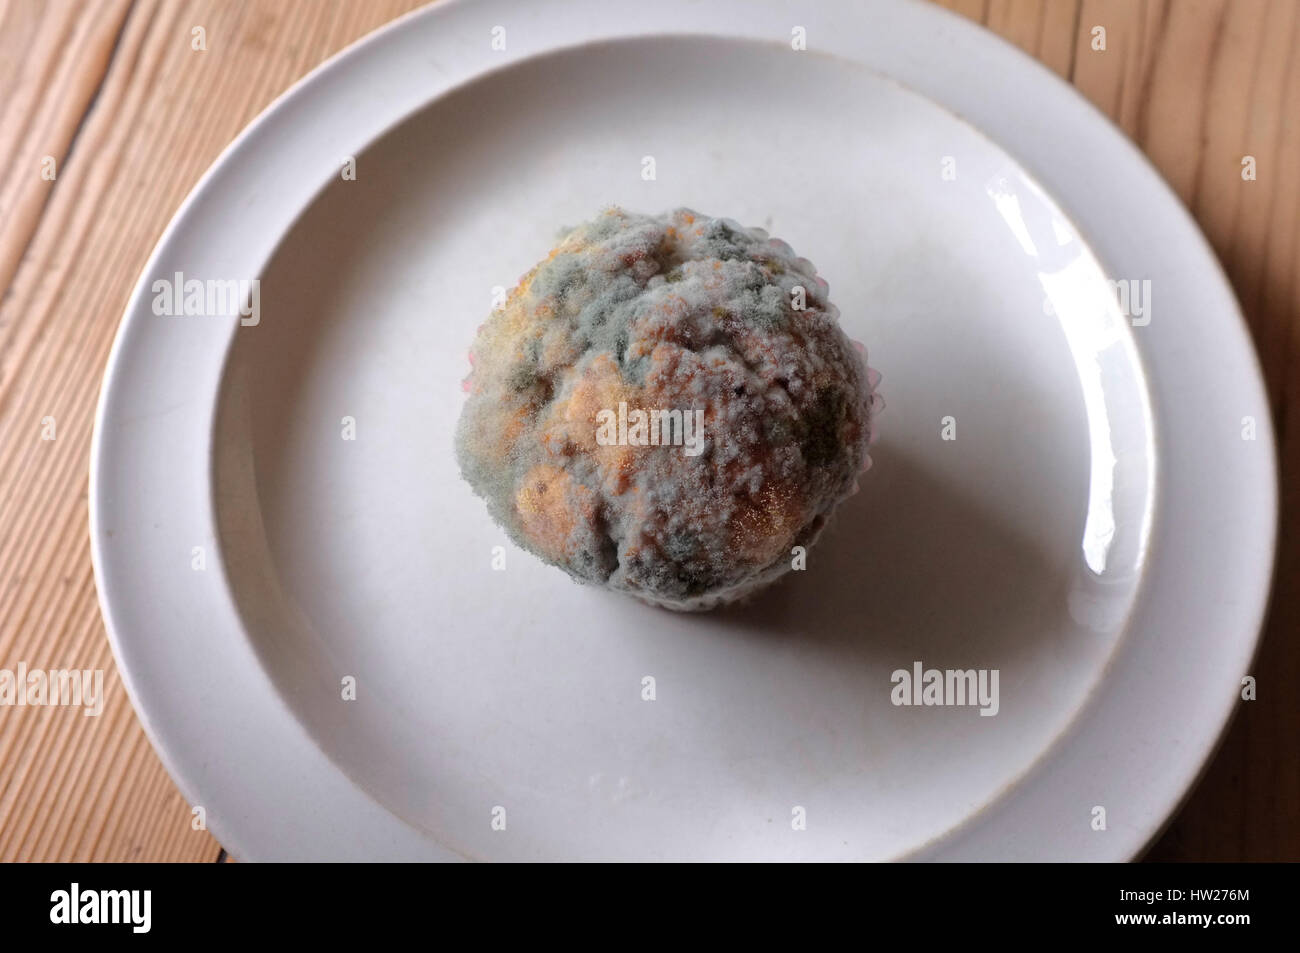 A mouldy cake on a plate. Stock Photo